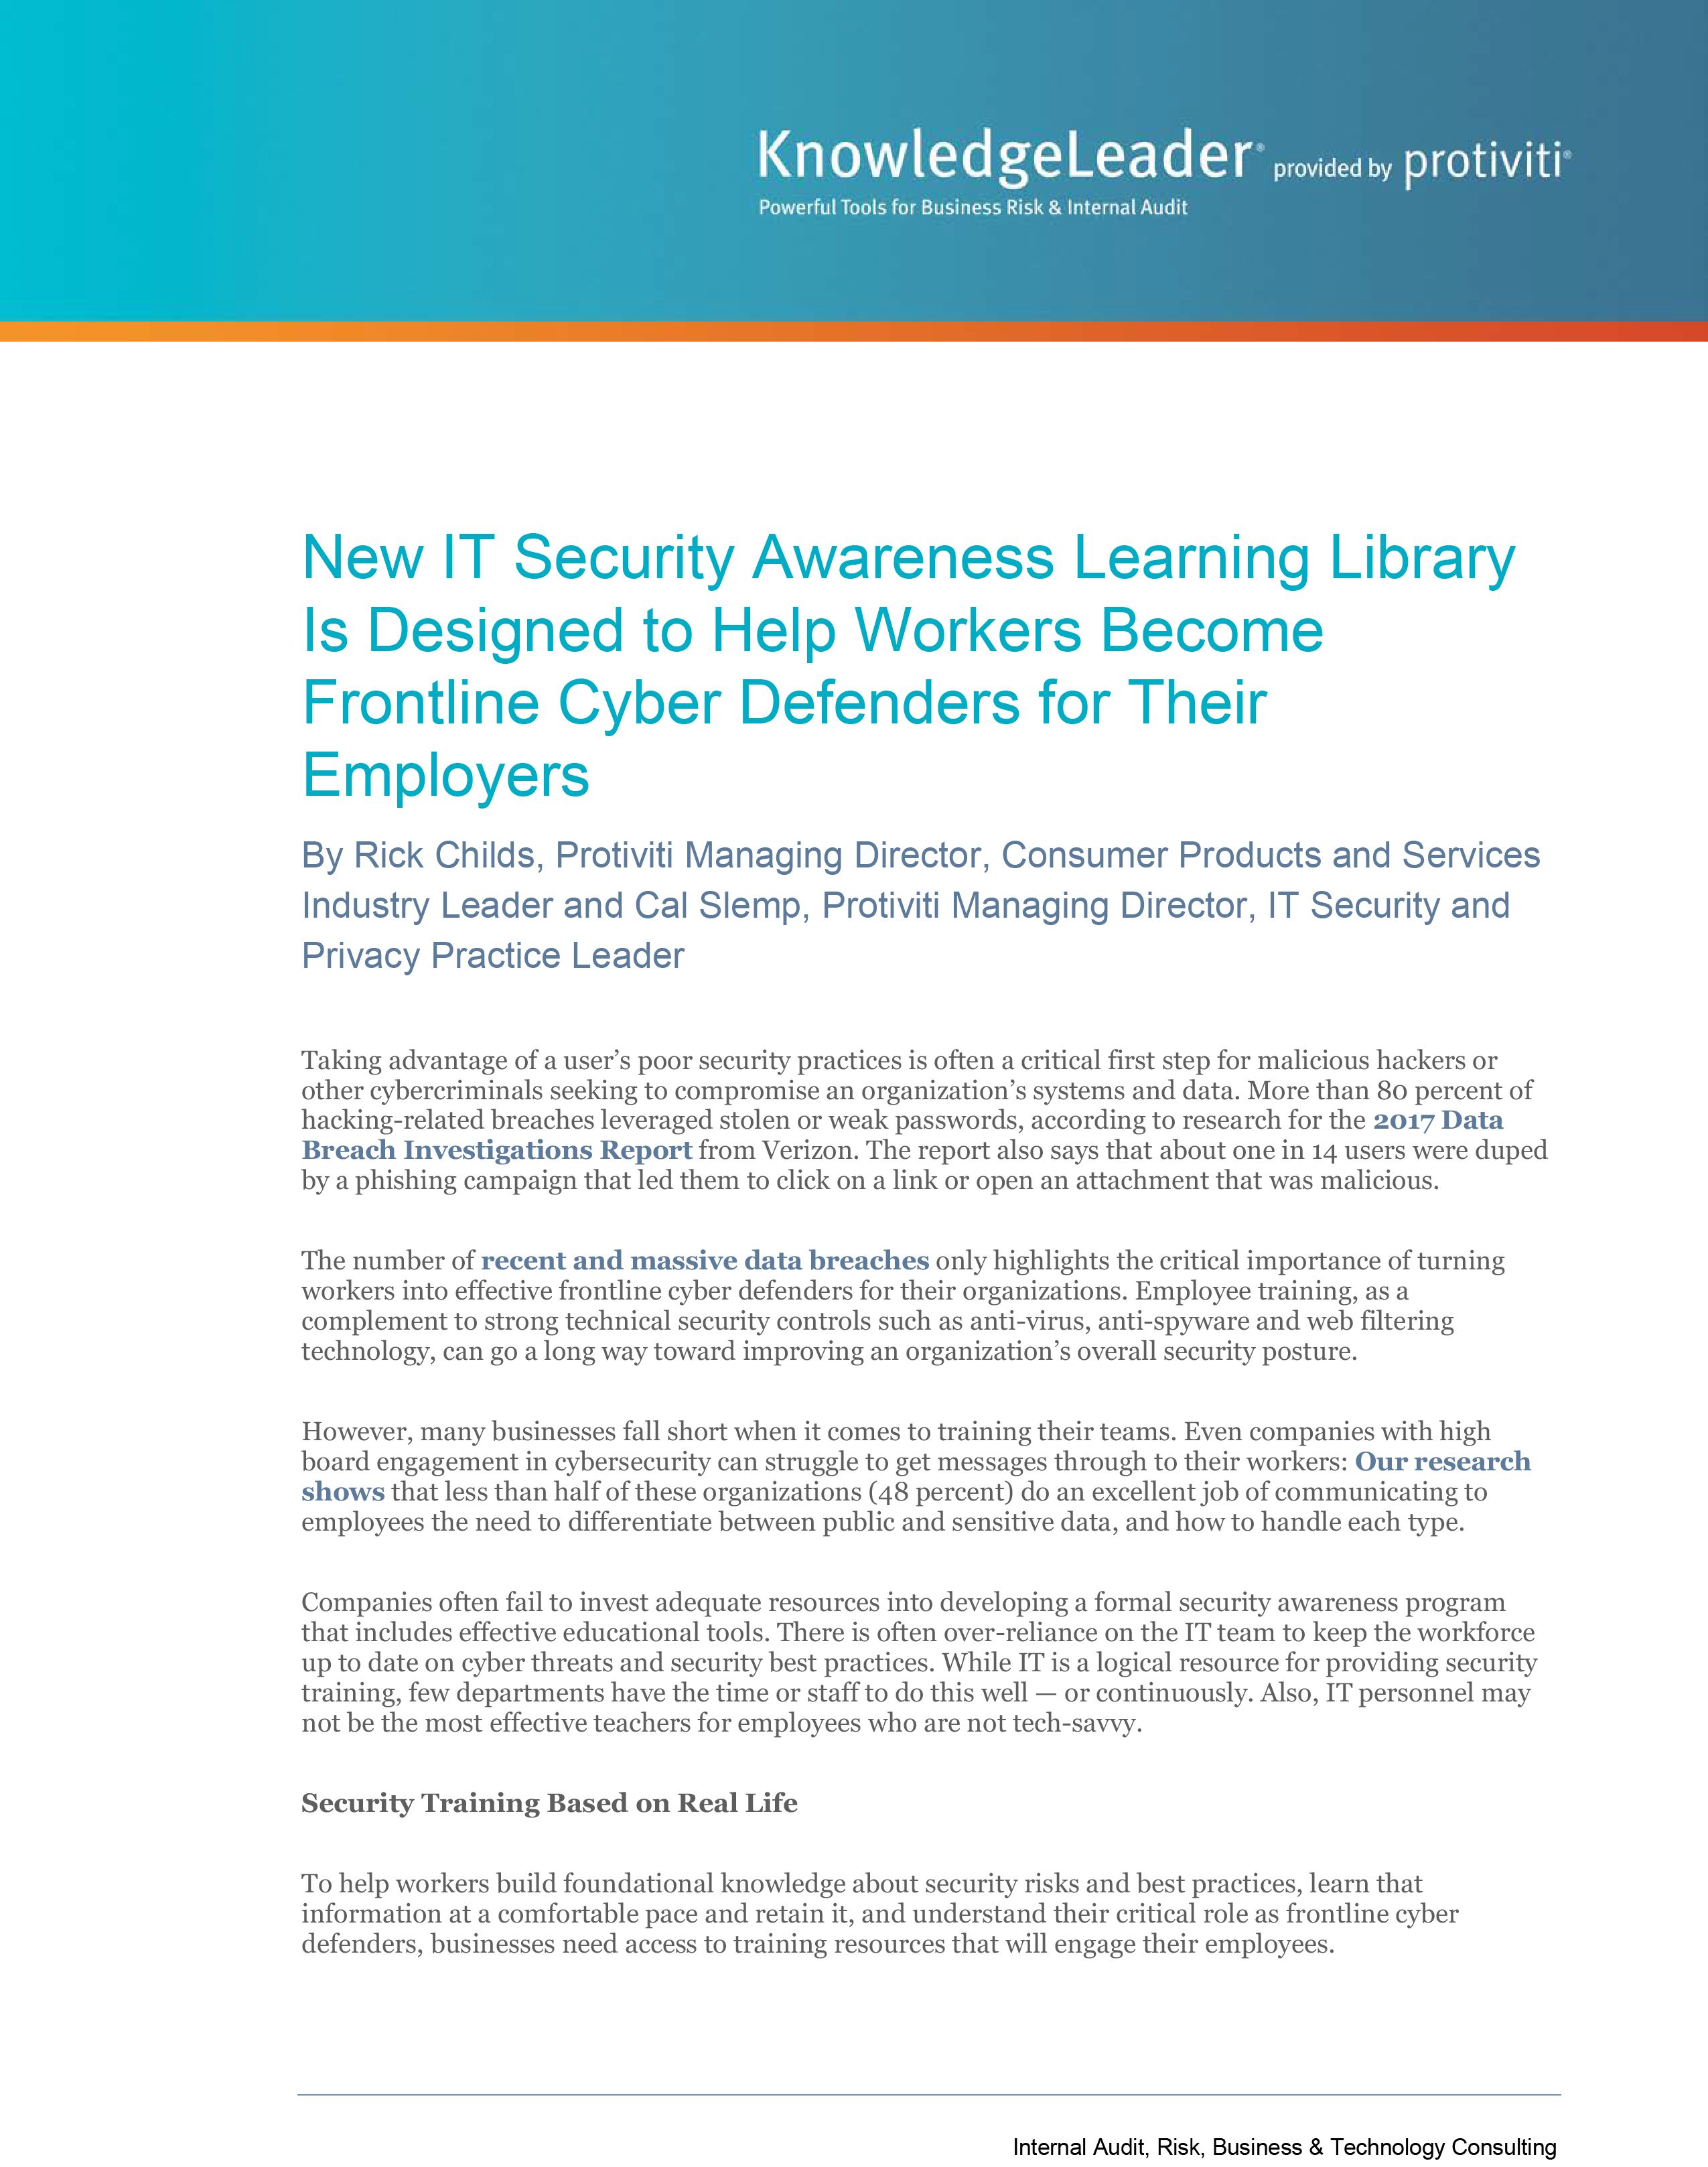 Screenshot of the first page of New IT Security Awareness Learning Library Is Designed to Help Workers Become Frontline Cyber Defenders for Their Employers